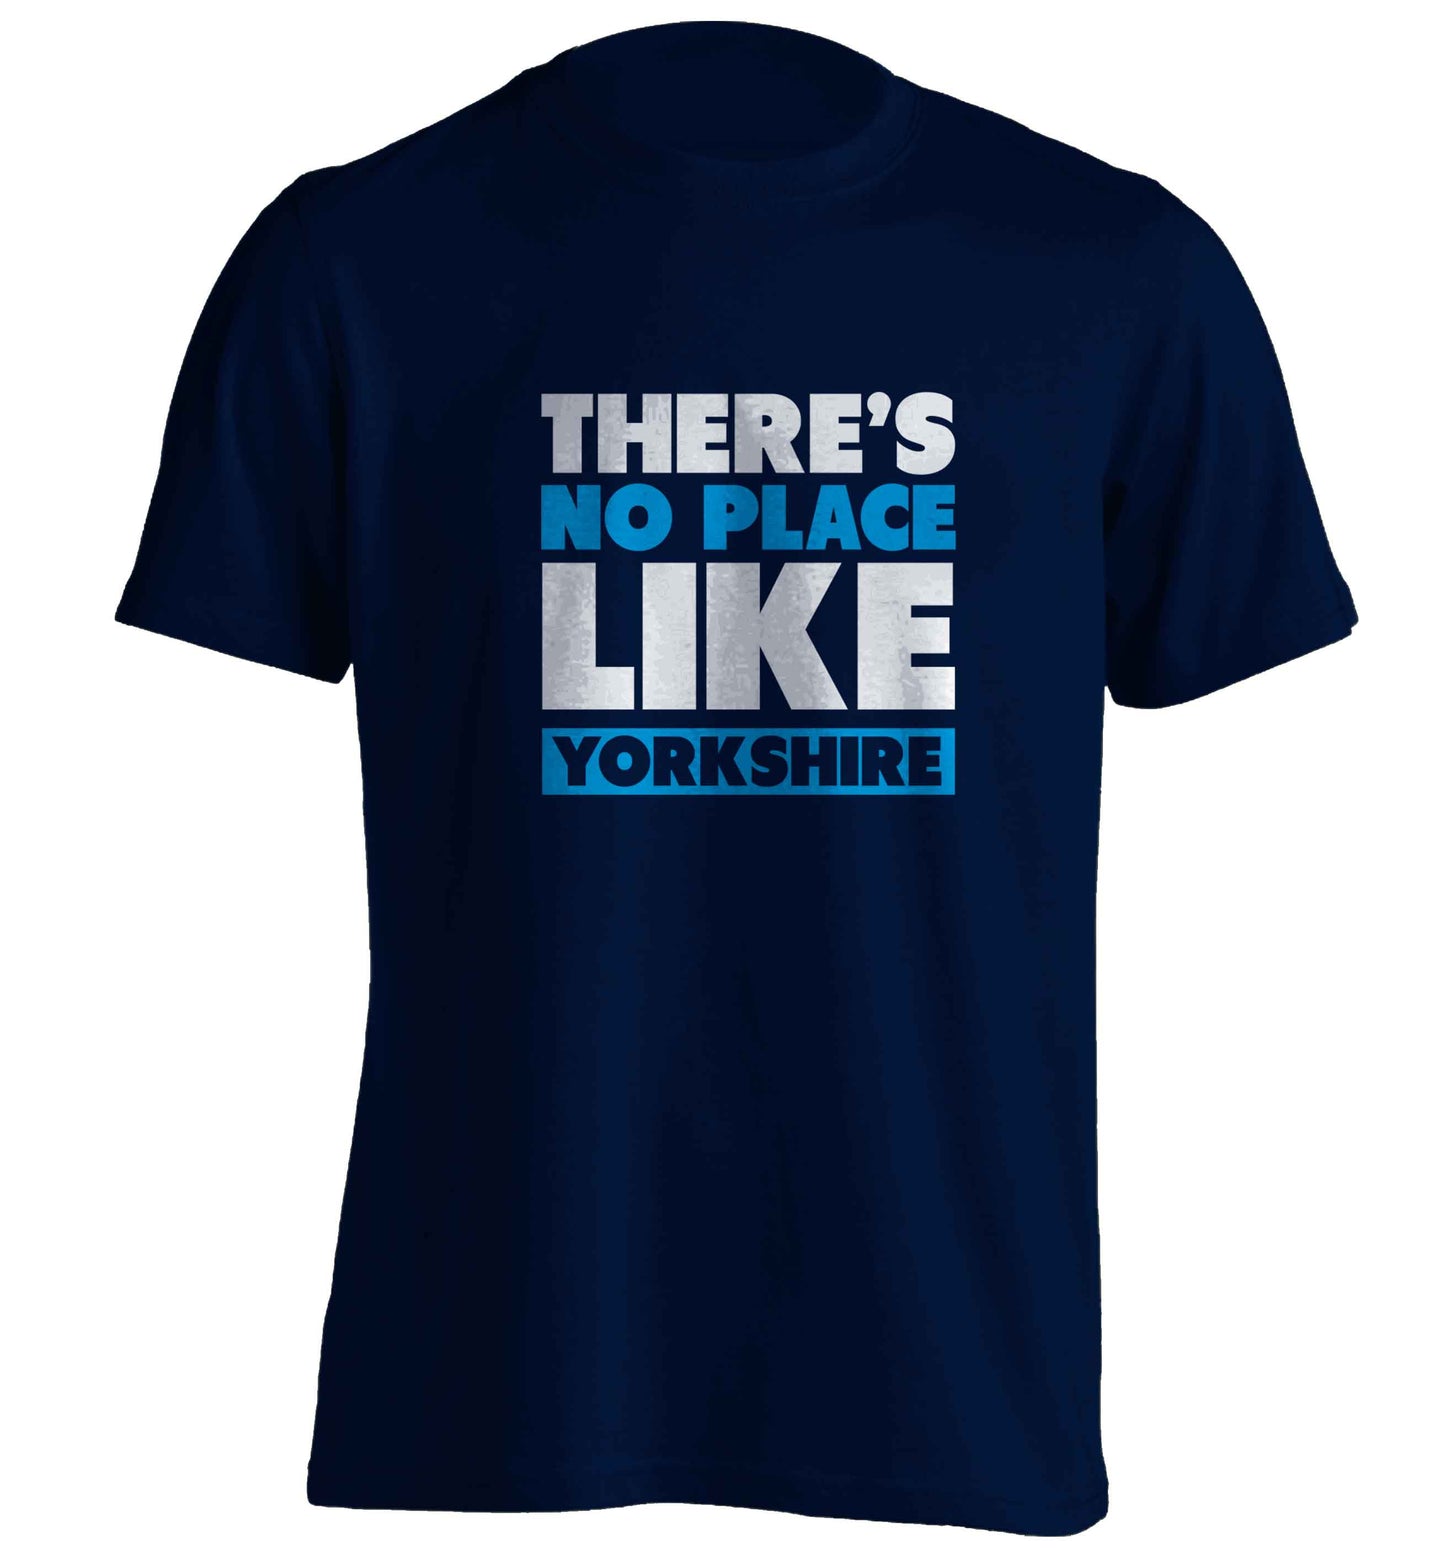 There's no place like Yorkshire adults unisex navy Tshirt 2XL